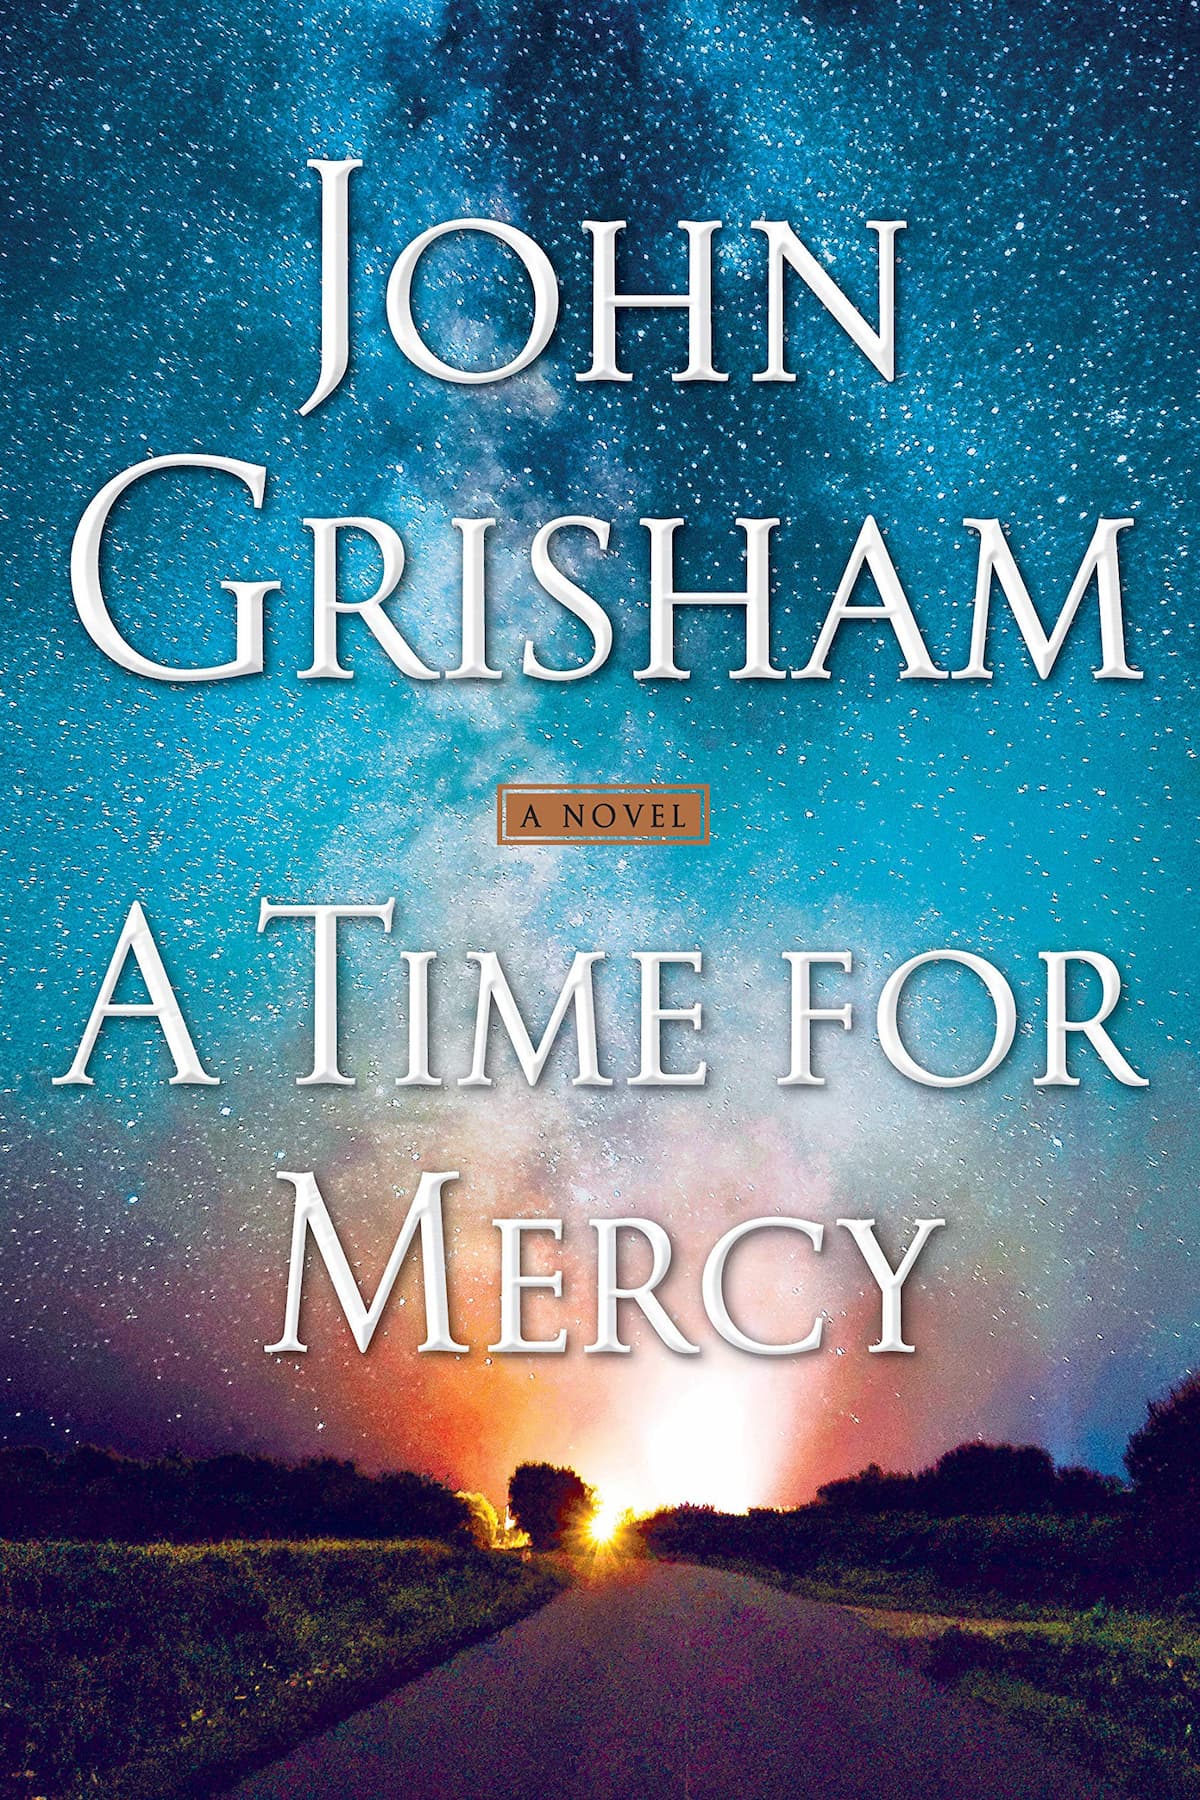 A Time for Mercy - John Grisham (Jake Brigance Series Book 3), Crime Fiction and Mysteries, Fiction, Jake Brigance Books In Order, Jake Brigance Series, John Grisham Books In Order, Legal Thrillers, Thrillers